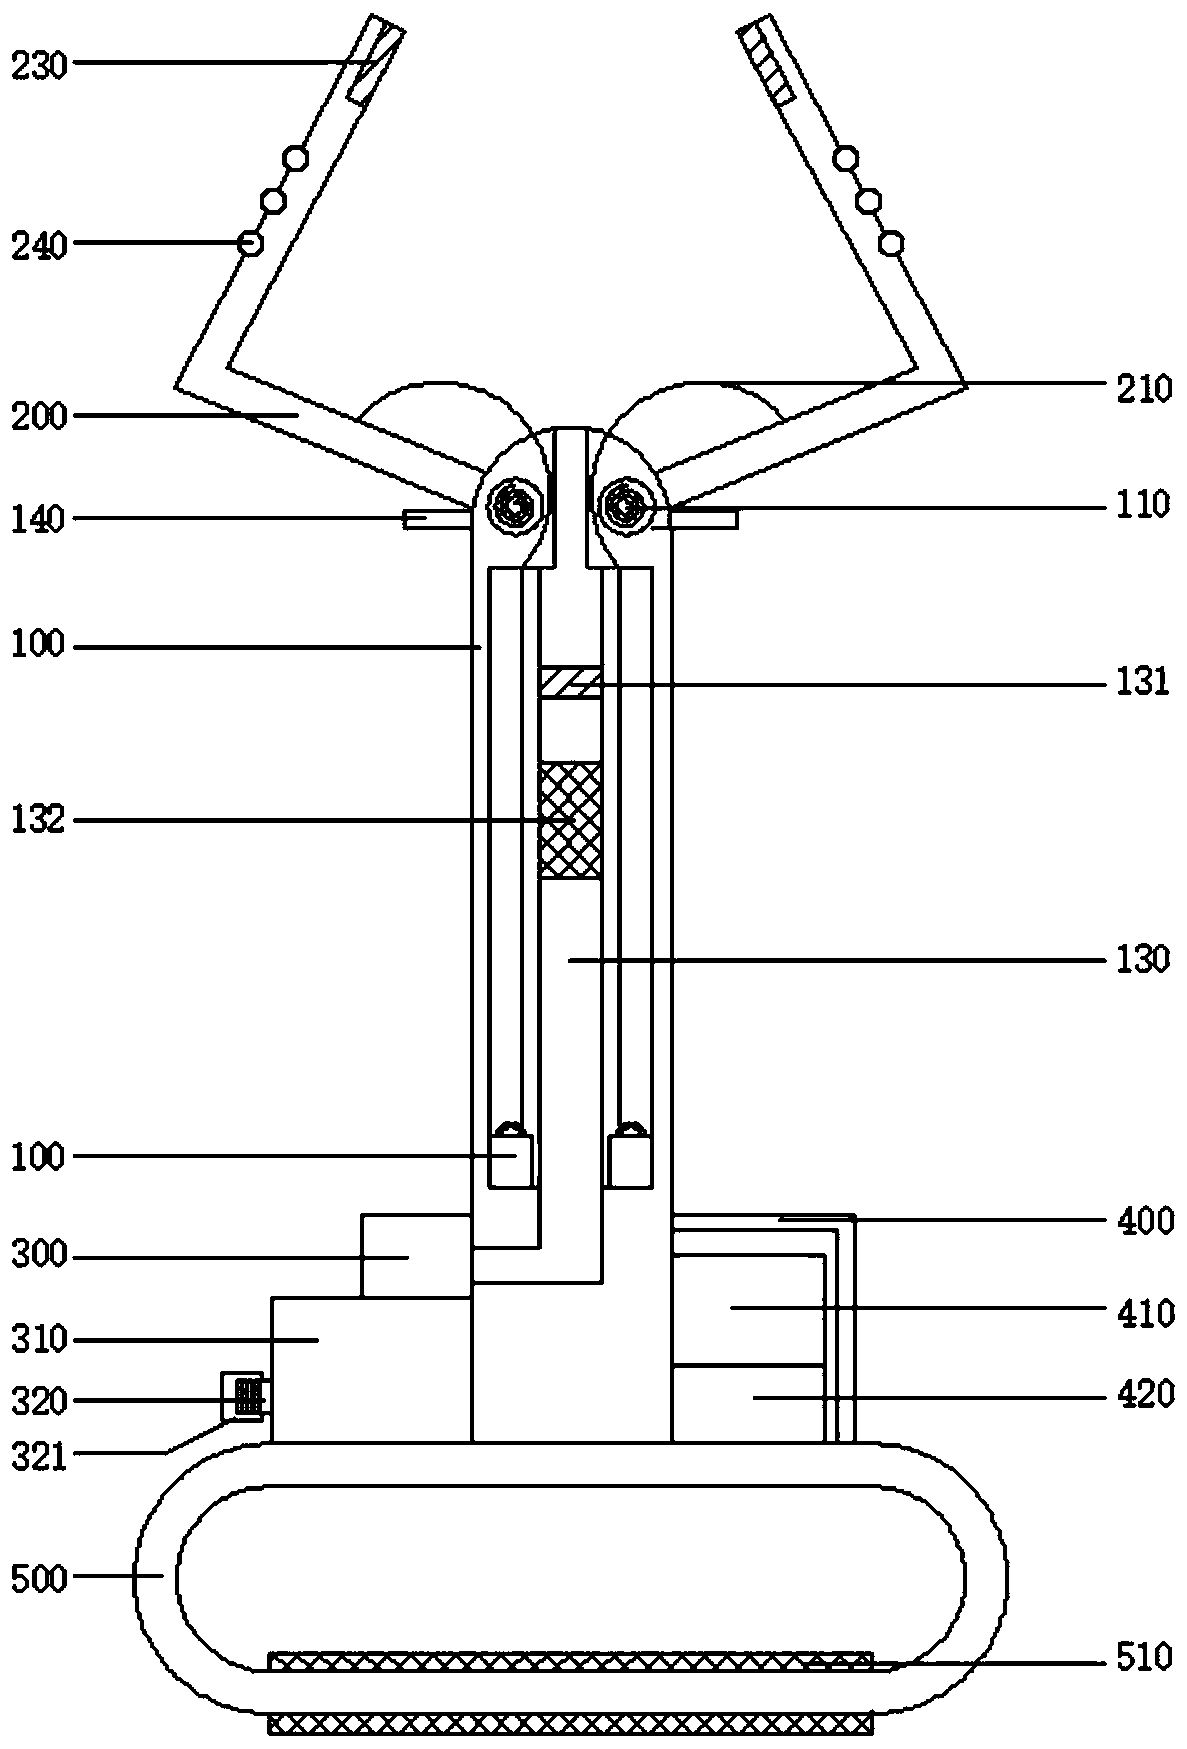 Digestive endoscopy titanium clamp device capable of injecting water